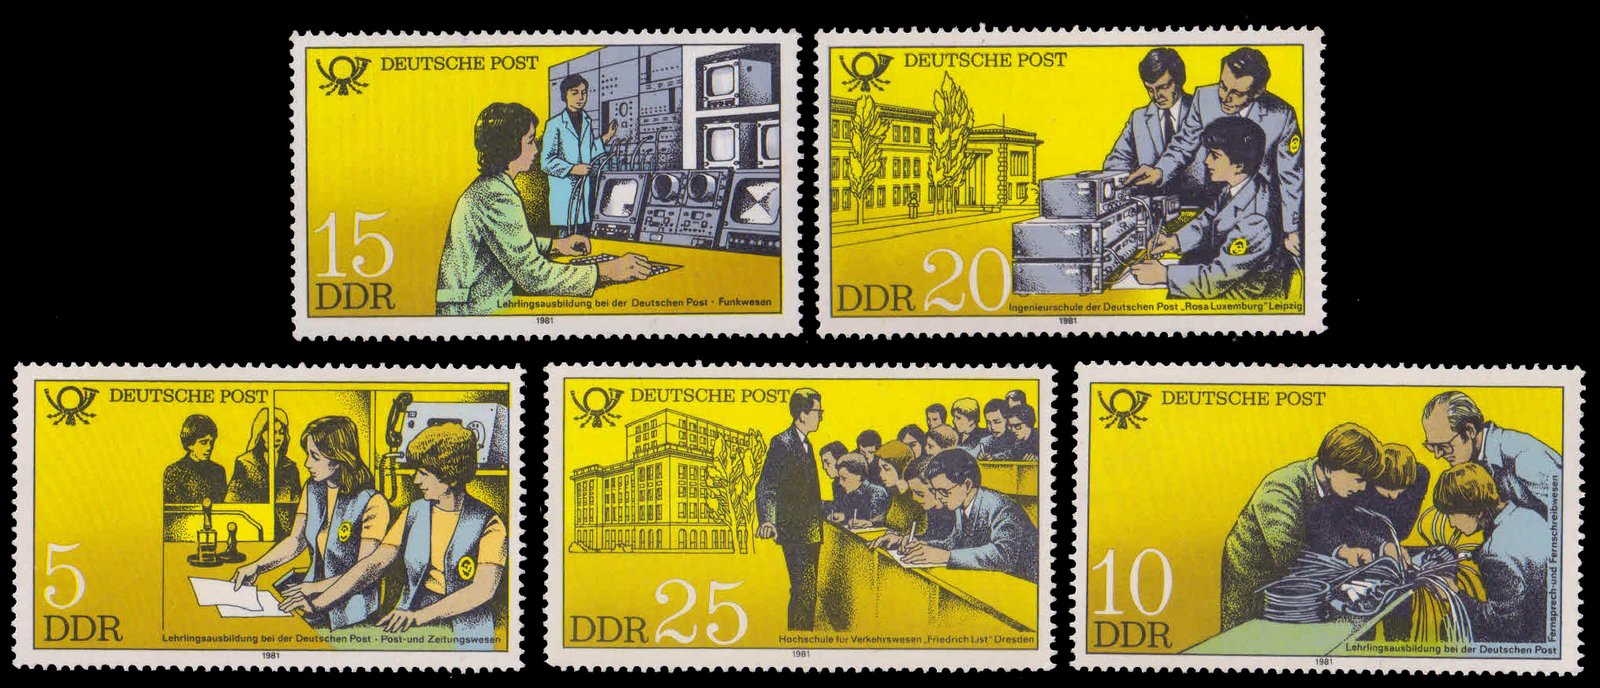 EAST GERMANY 1981-Post Office Buildings & Training, Set of 5, MNH, S.G. E2298-2302-Cat £ 3.85